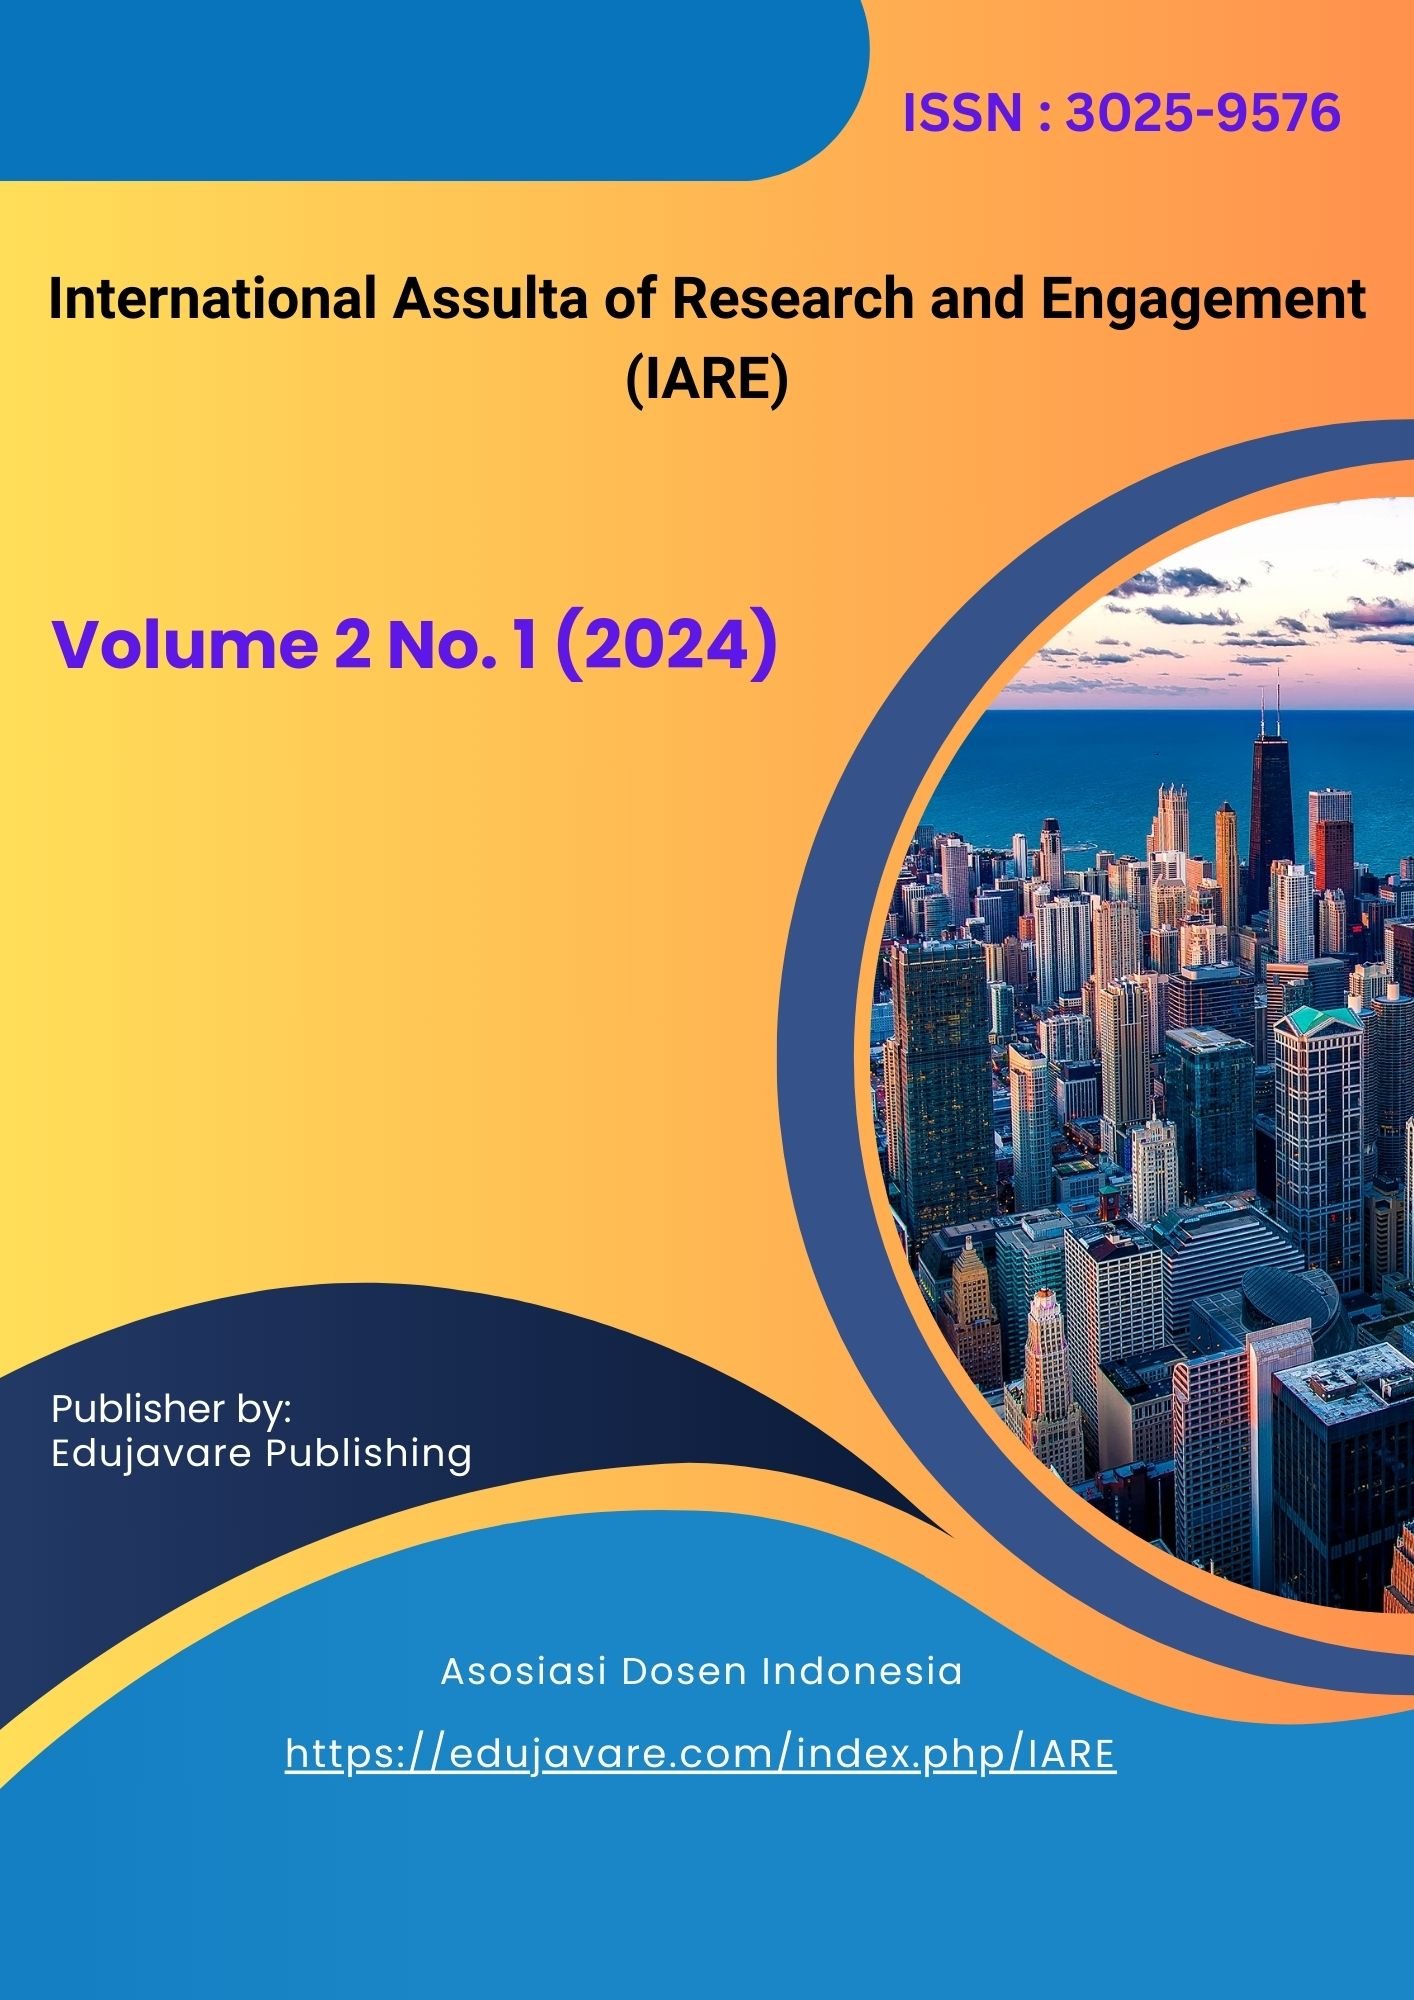 					View Vol. 2 No. 1 (2024): International Assulta of Research and Engagement (IARE)
				